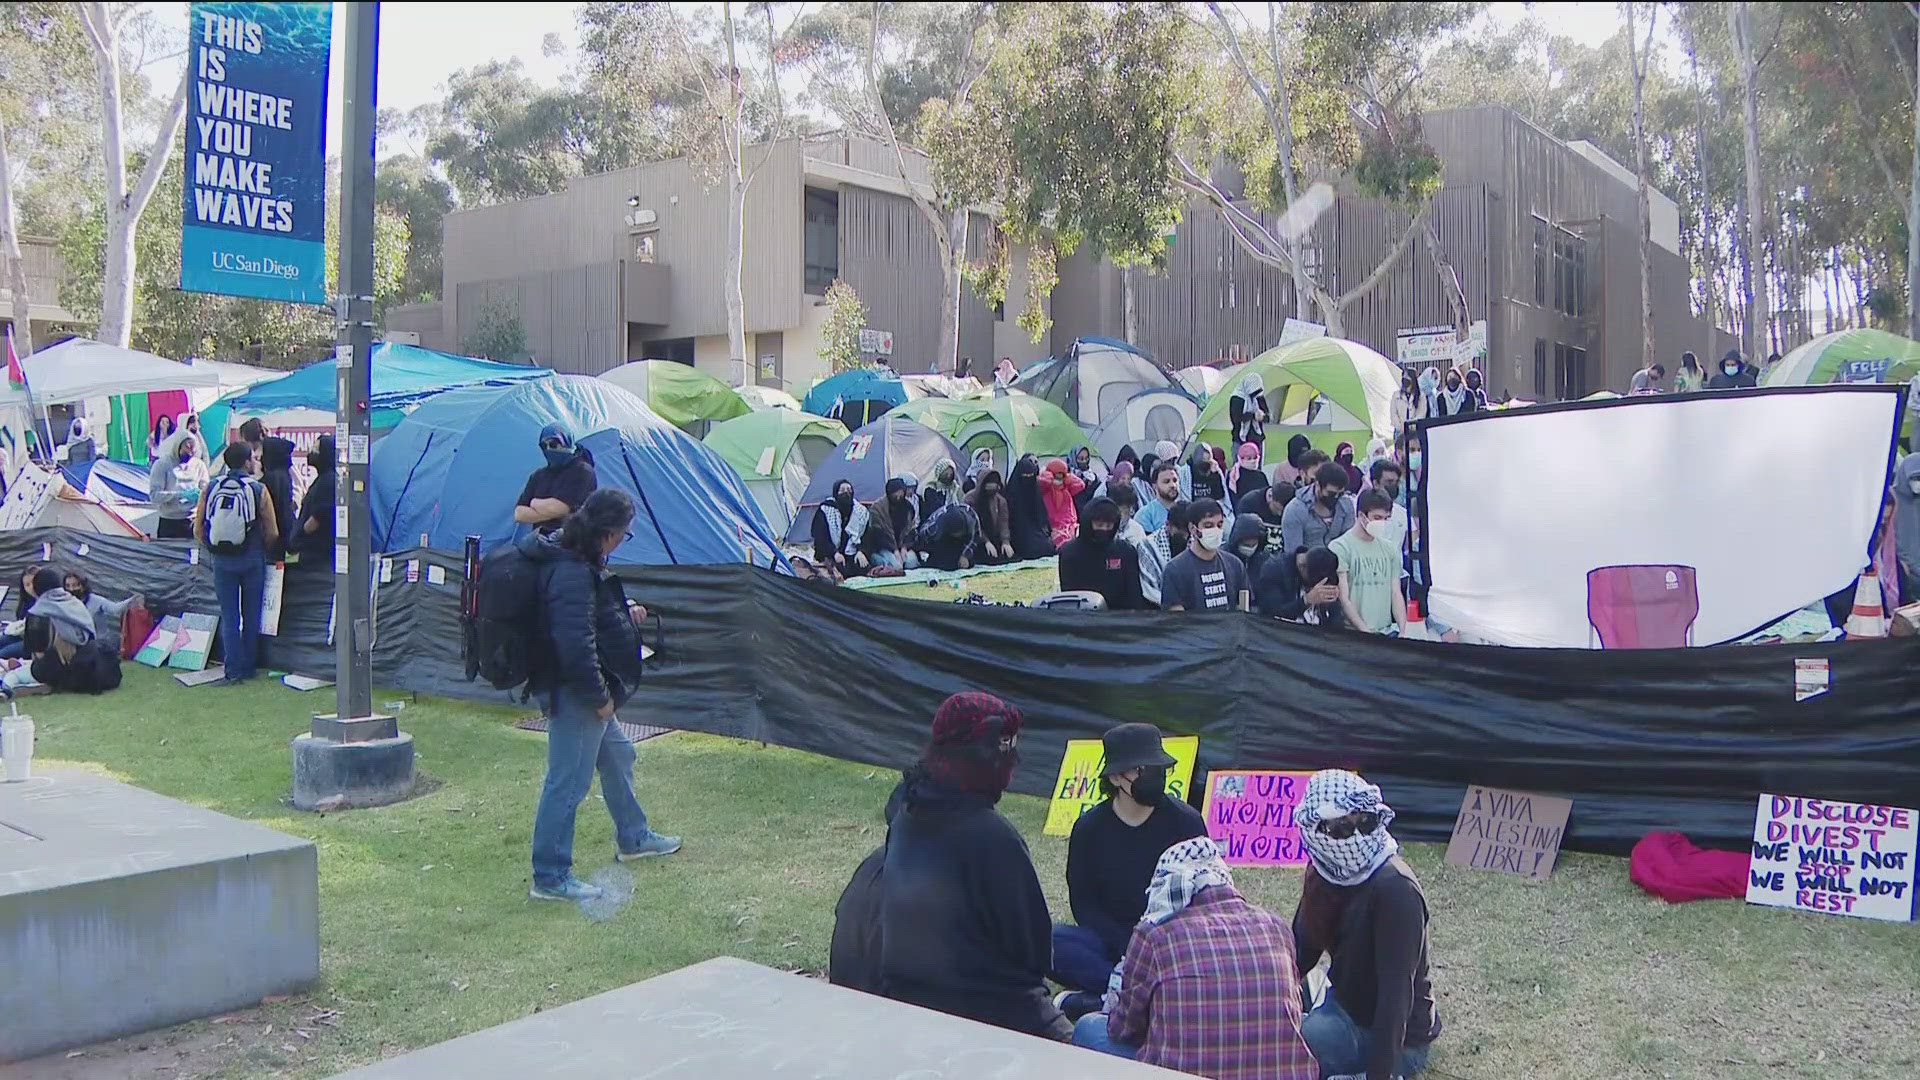 The protest has remained peaceful as San Diego community members have camped out on UC San Diego's campus.